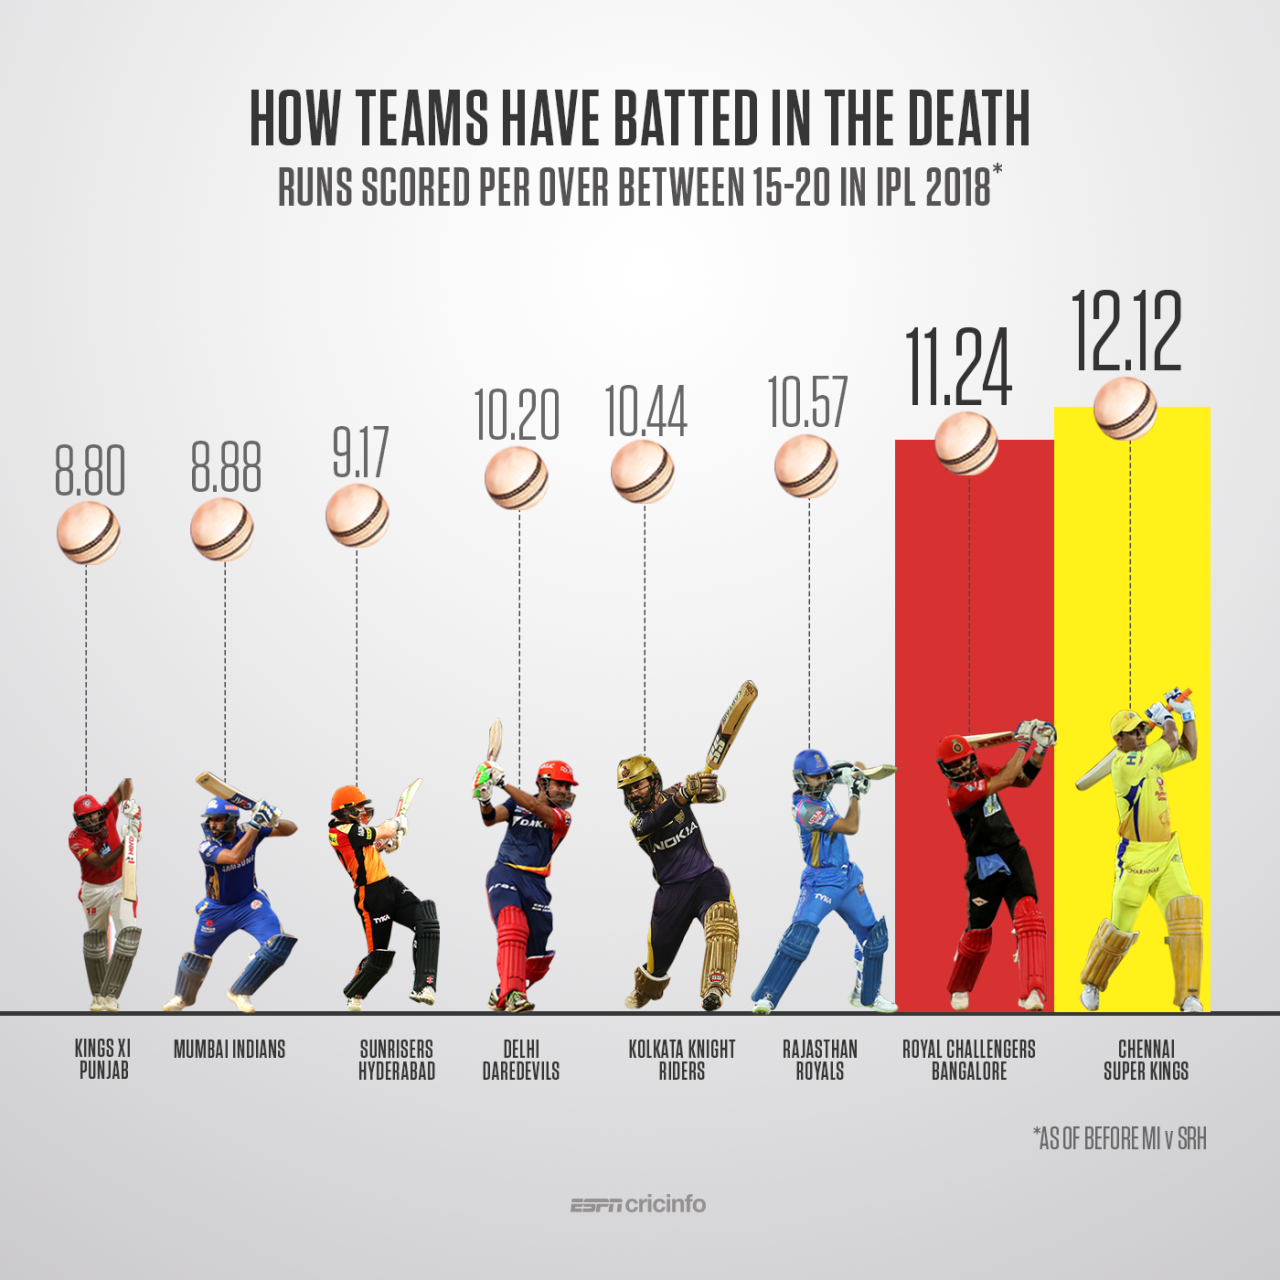 Chennai Super Kings and Royal Challengers Bangalore have scored quickest in the death 